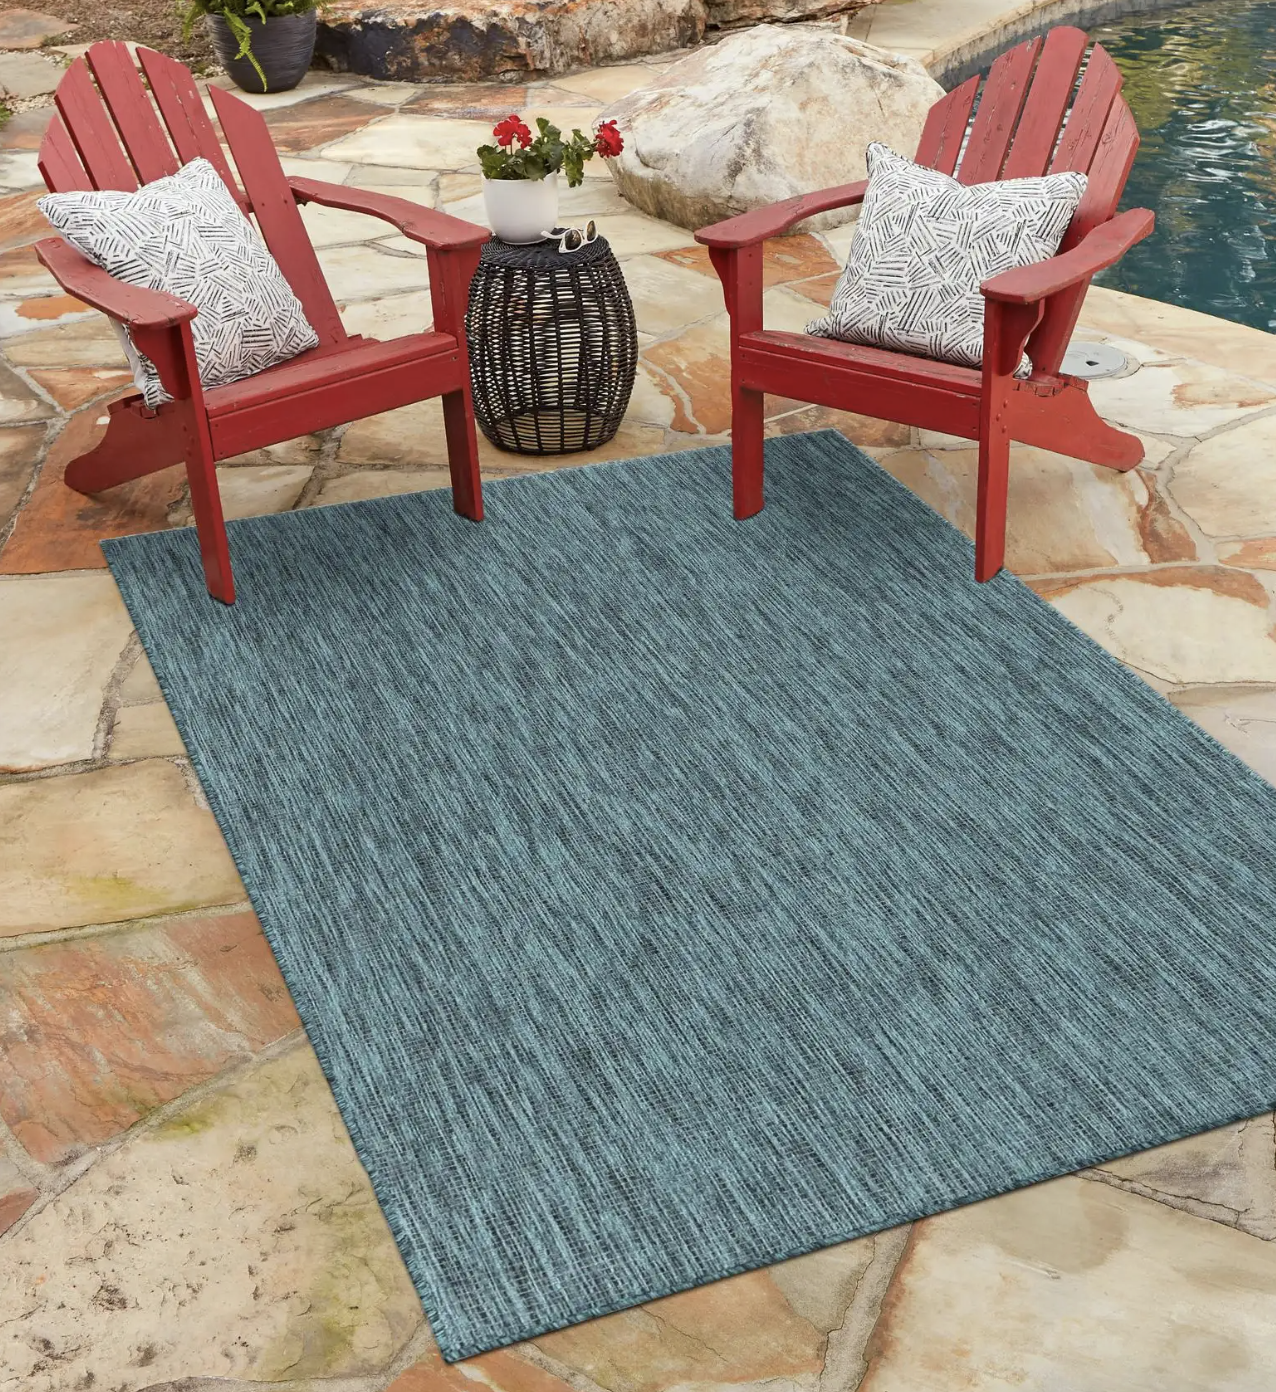 An outdoor rug is shown by a pool